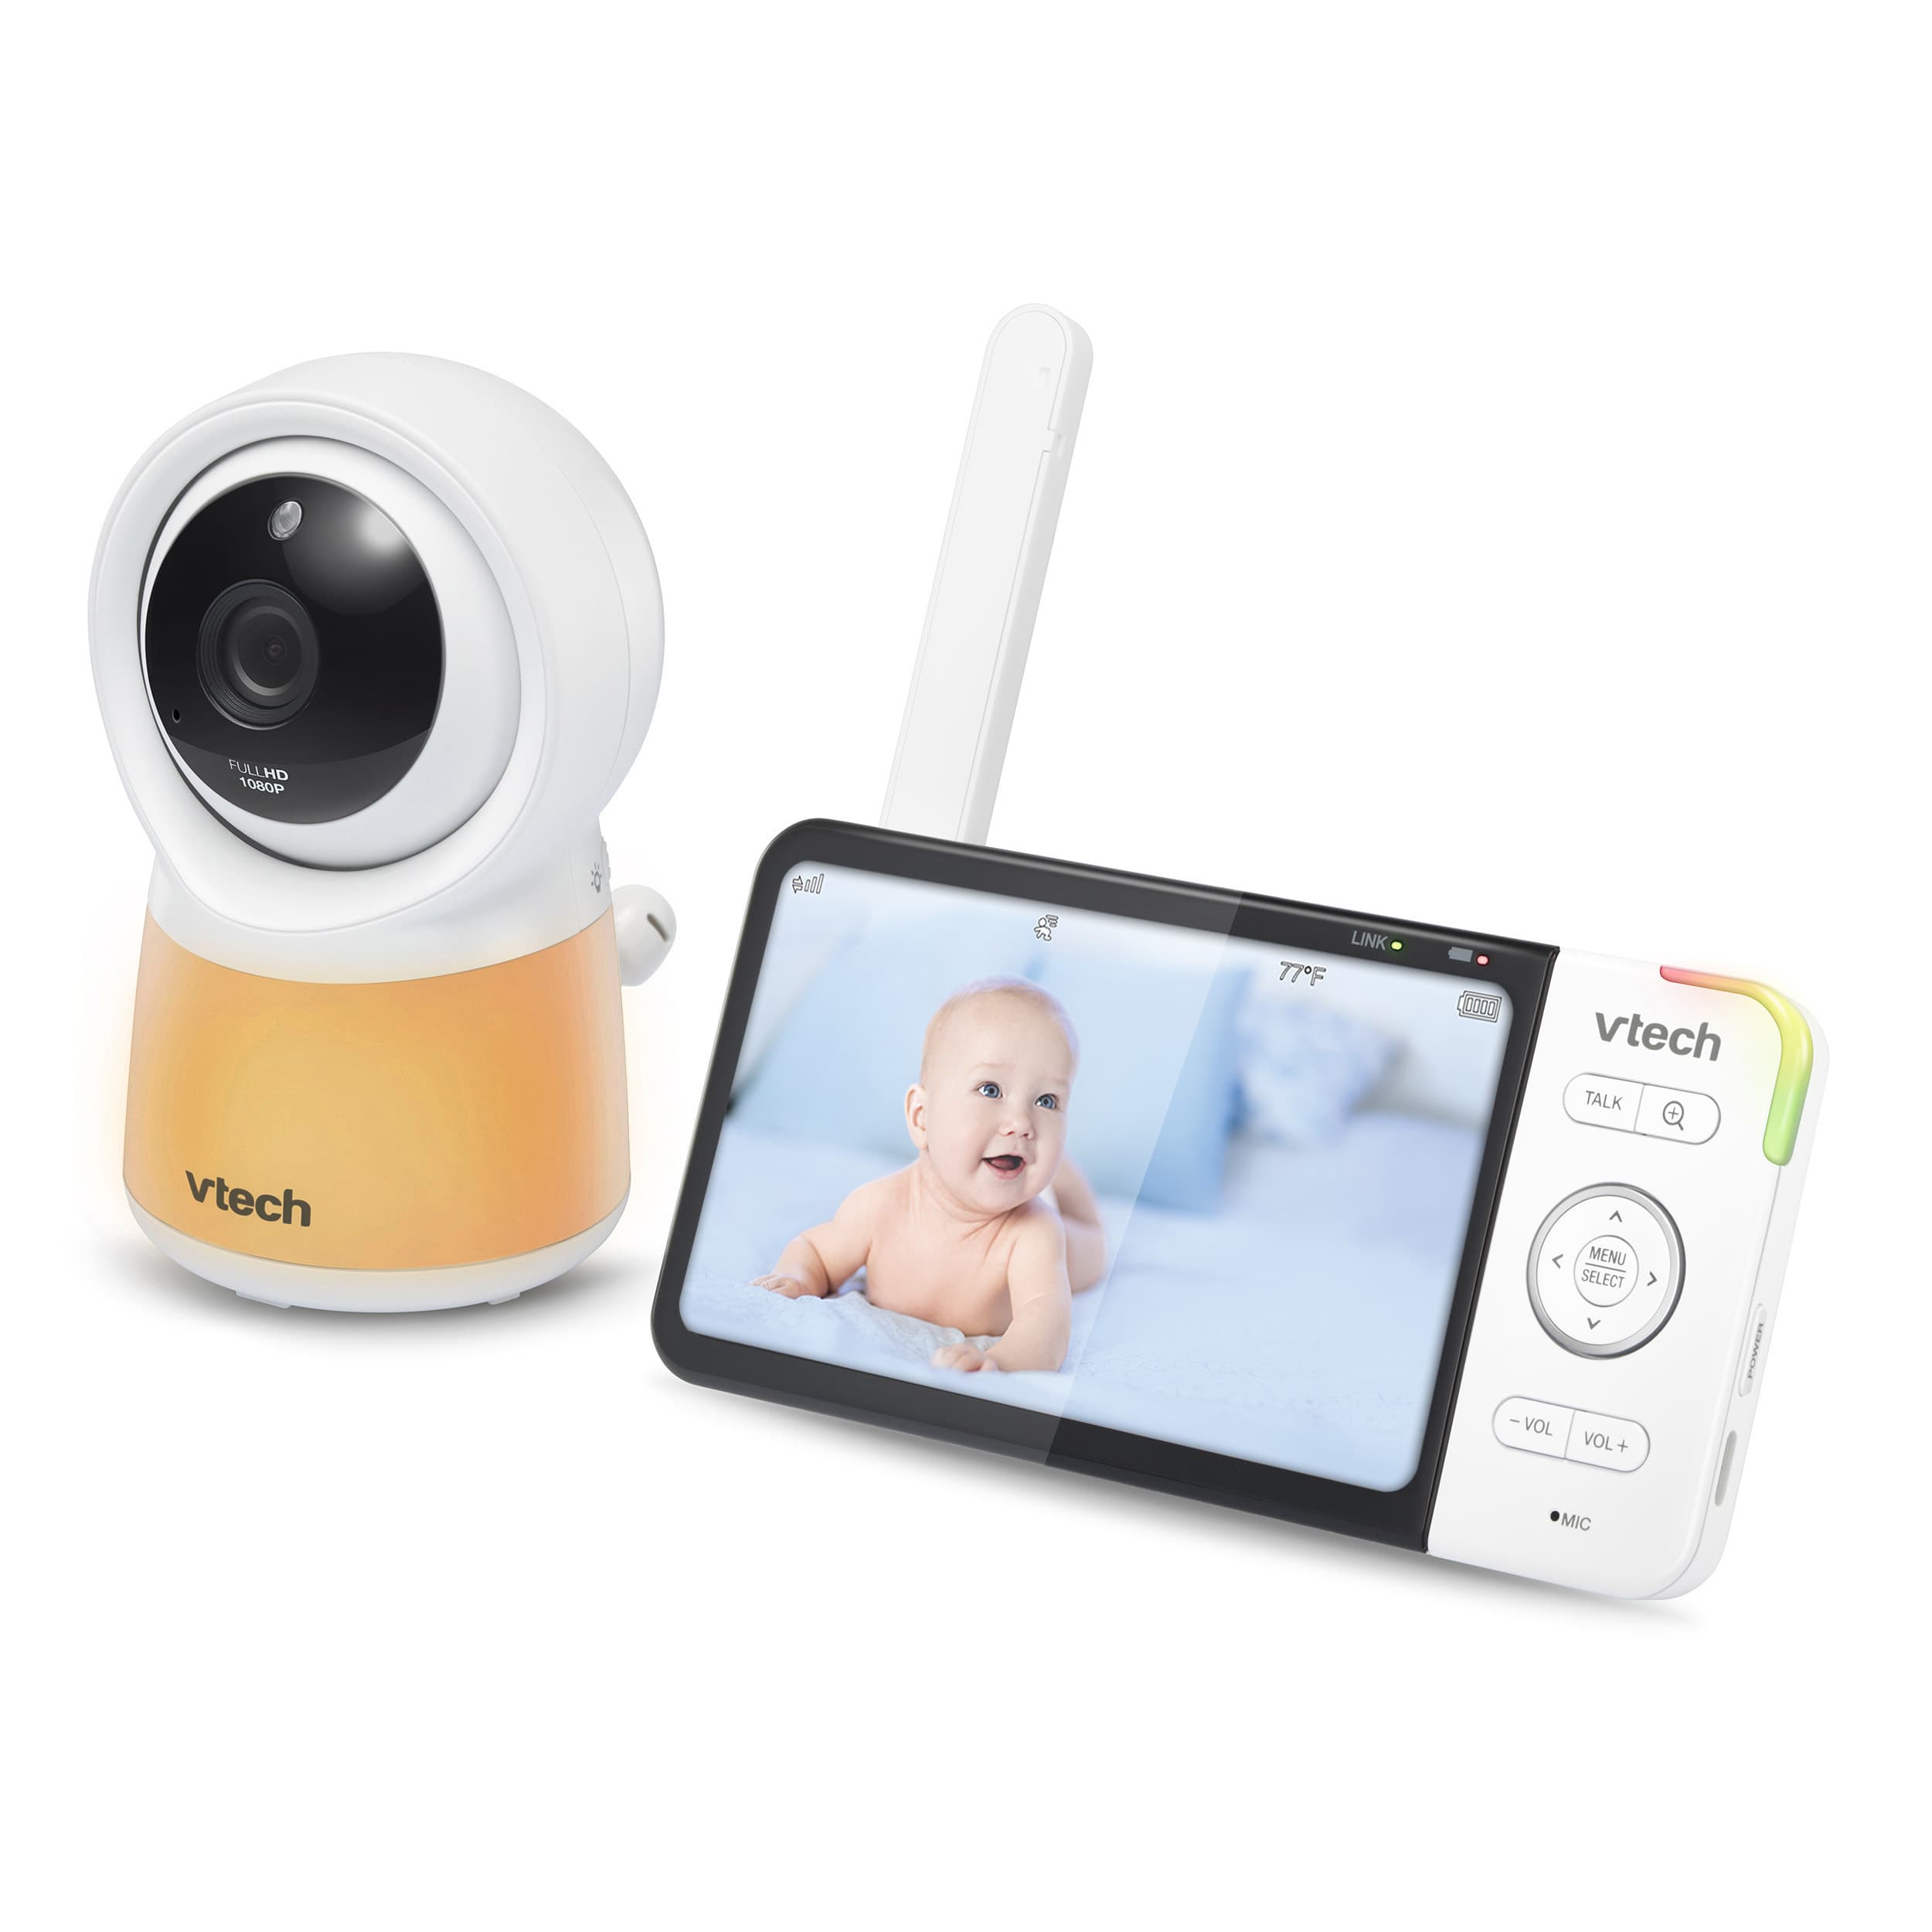 Wi-Fi Remote Access Video Baby Monitor with 5" display and 1080p HD Display, Built-in night light